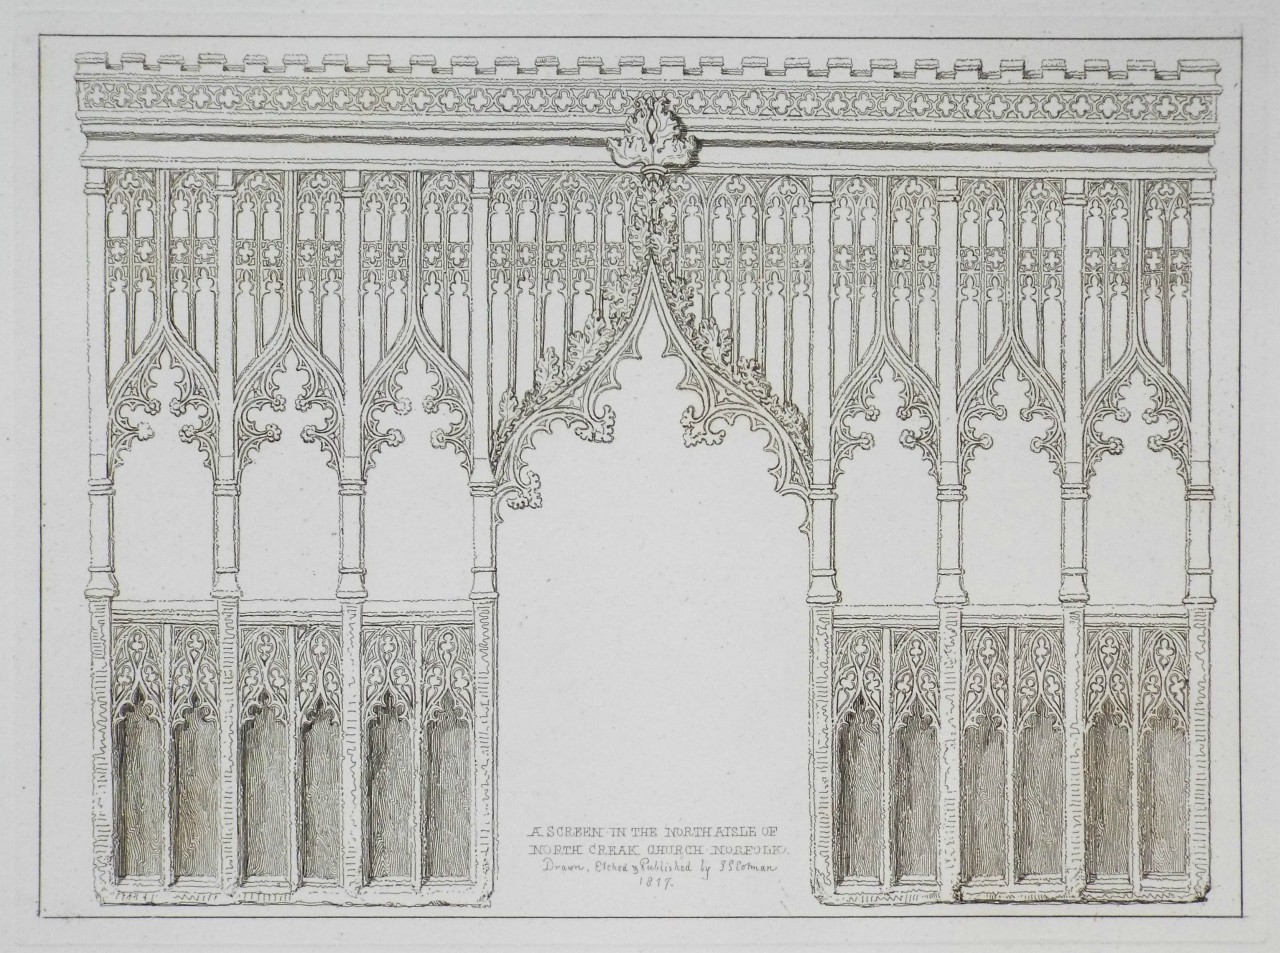 Etching - A Screen in the North Aisle of North Creak Church Norfolk - Cotman